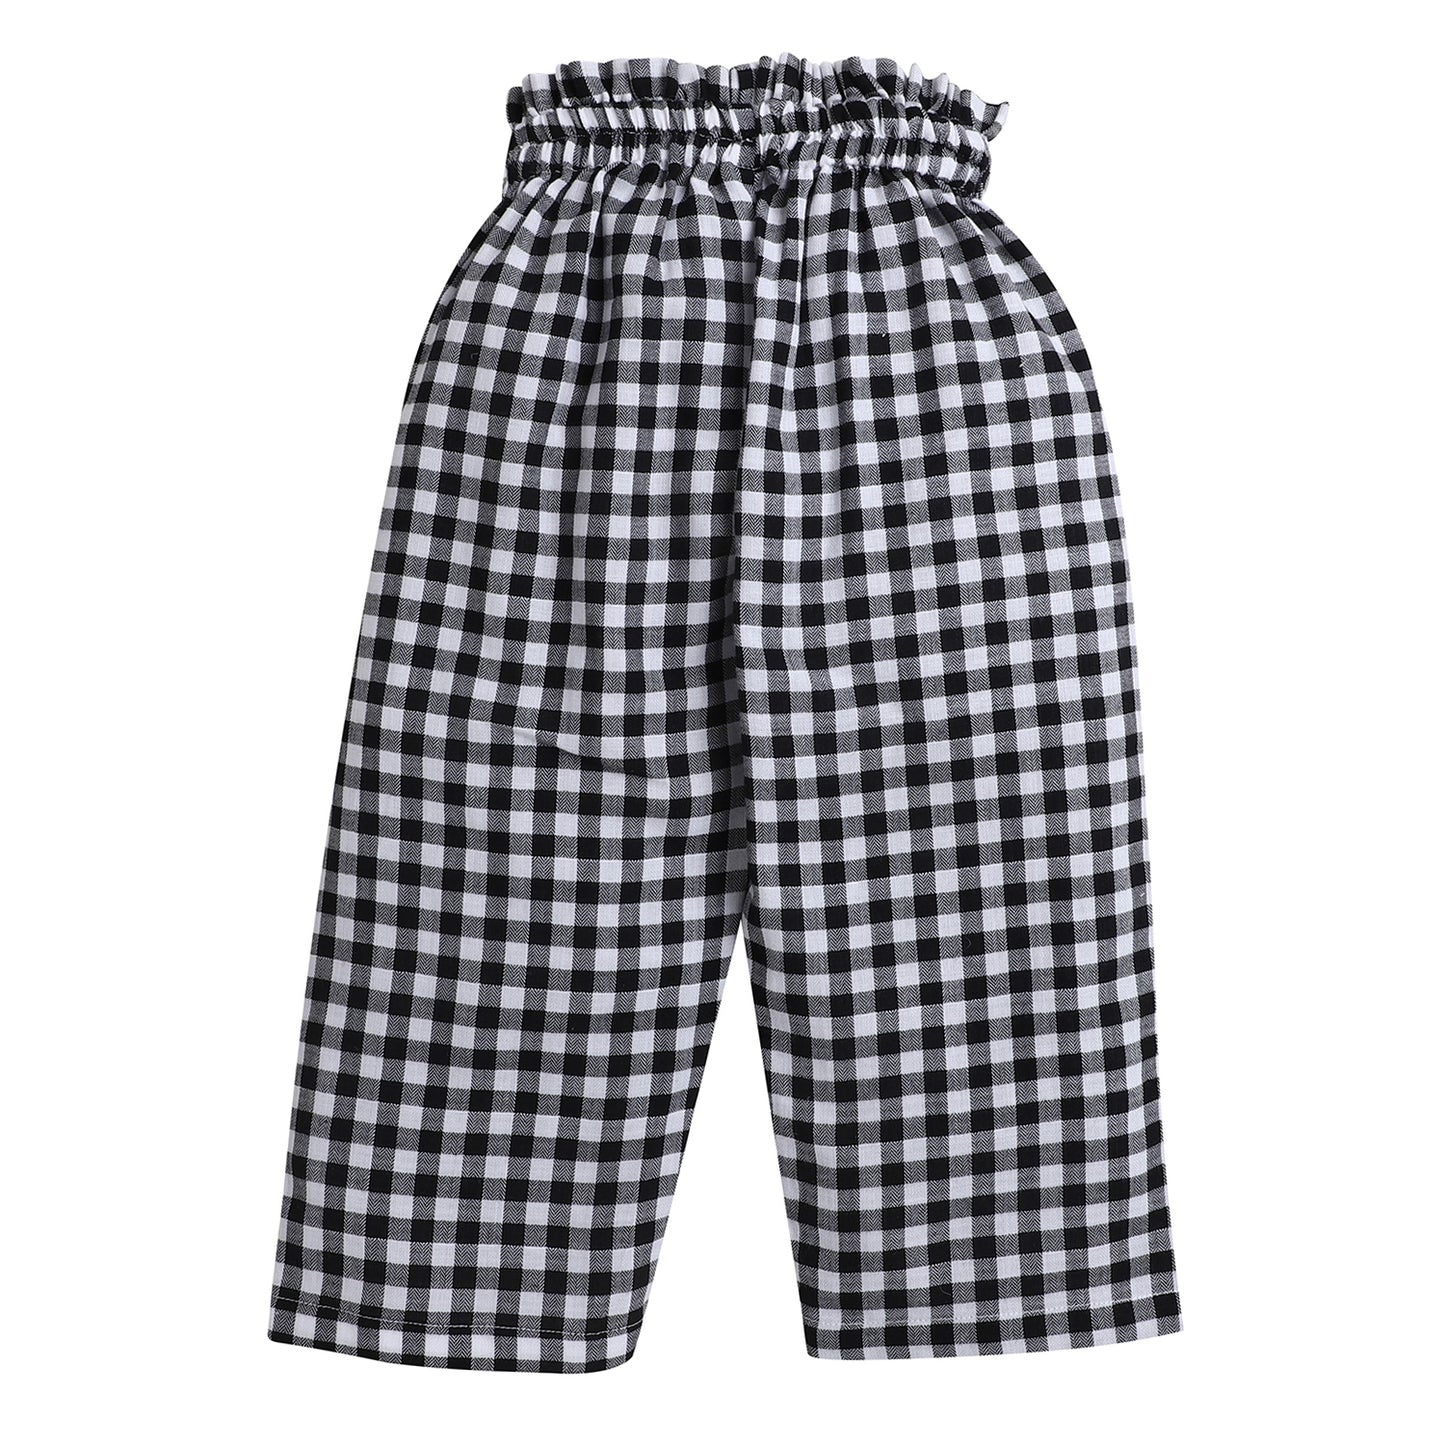 Black & White Checks Coord Set- Crop Top With Lace And Paper Bag Pant